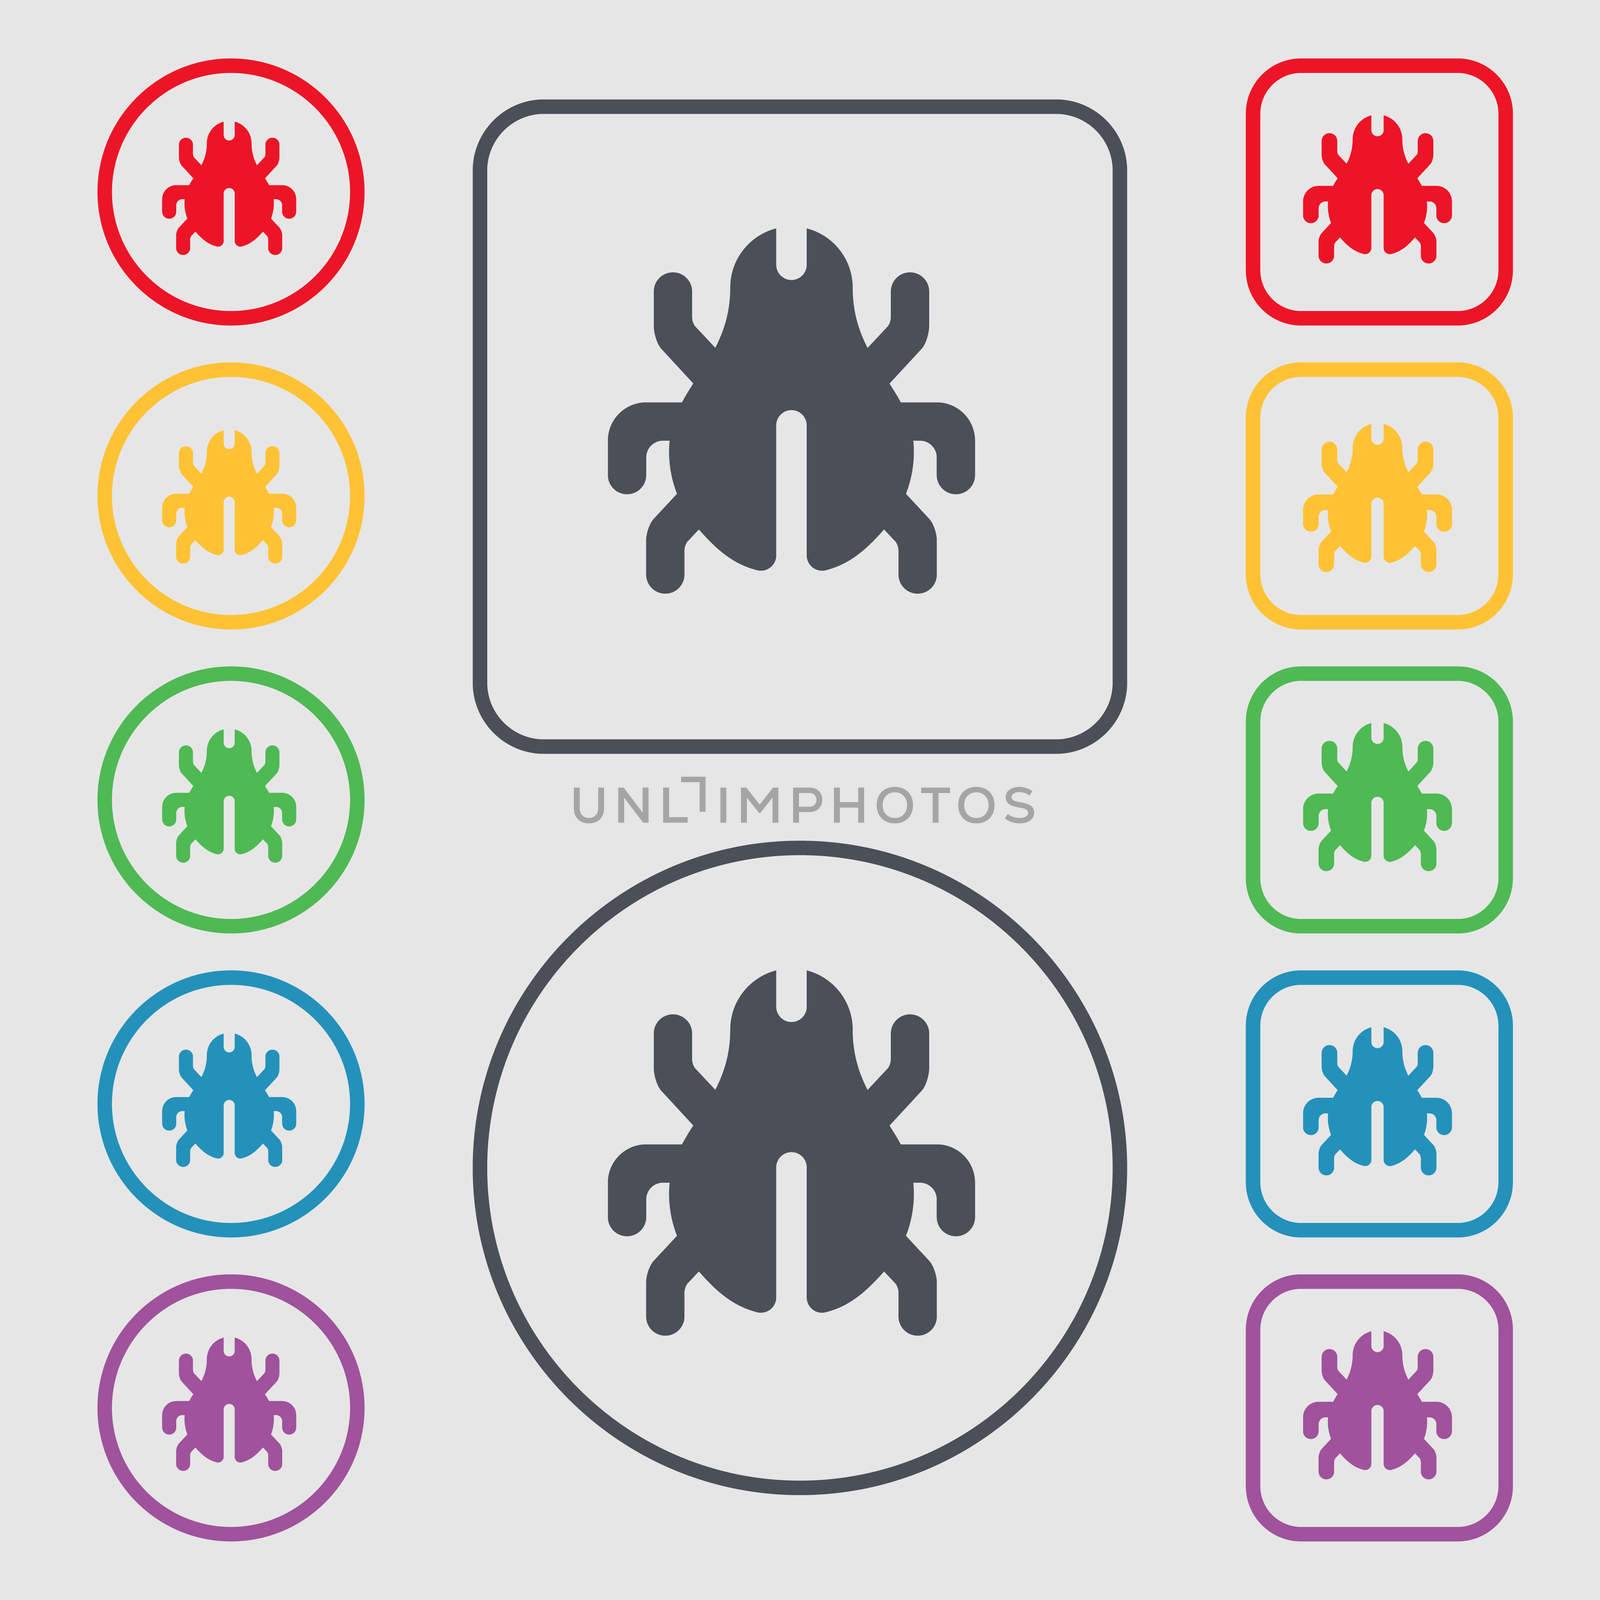 Software Bug, Virus, Disinfection, beetle icon sign. symbol on the Round and square buttons with frame. illustration